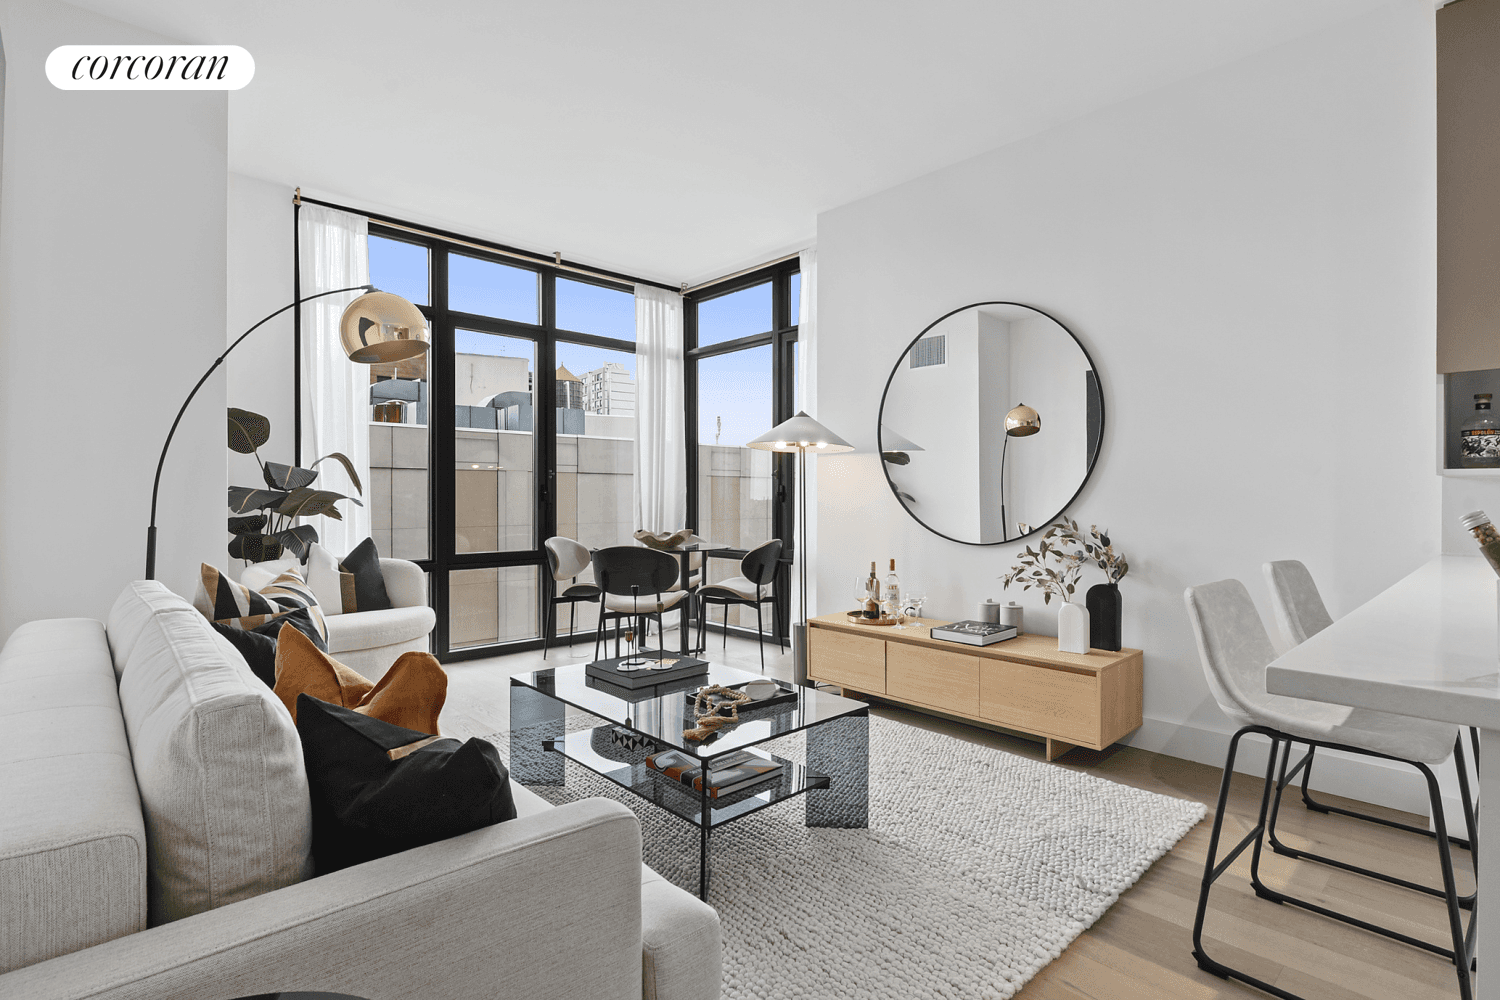 All Roads Lead to Home. Experience connectivity, convenience and an elevated rental experience at One Archer in the heart of downtown Jamaica, Queens.